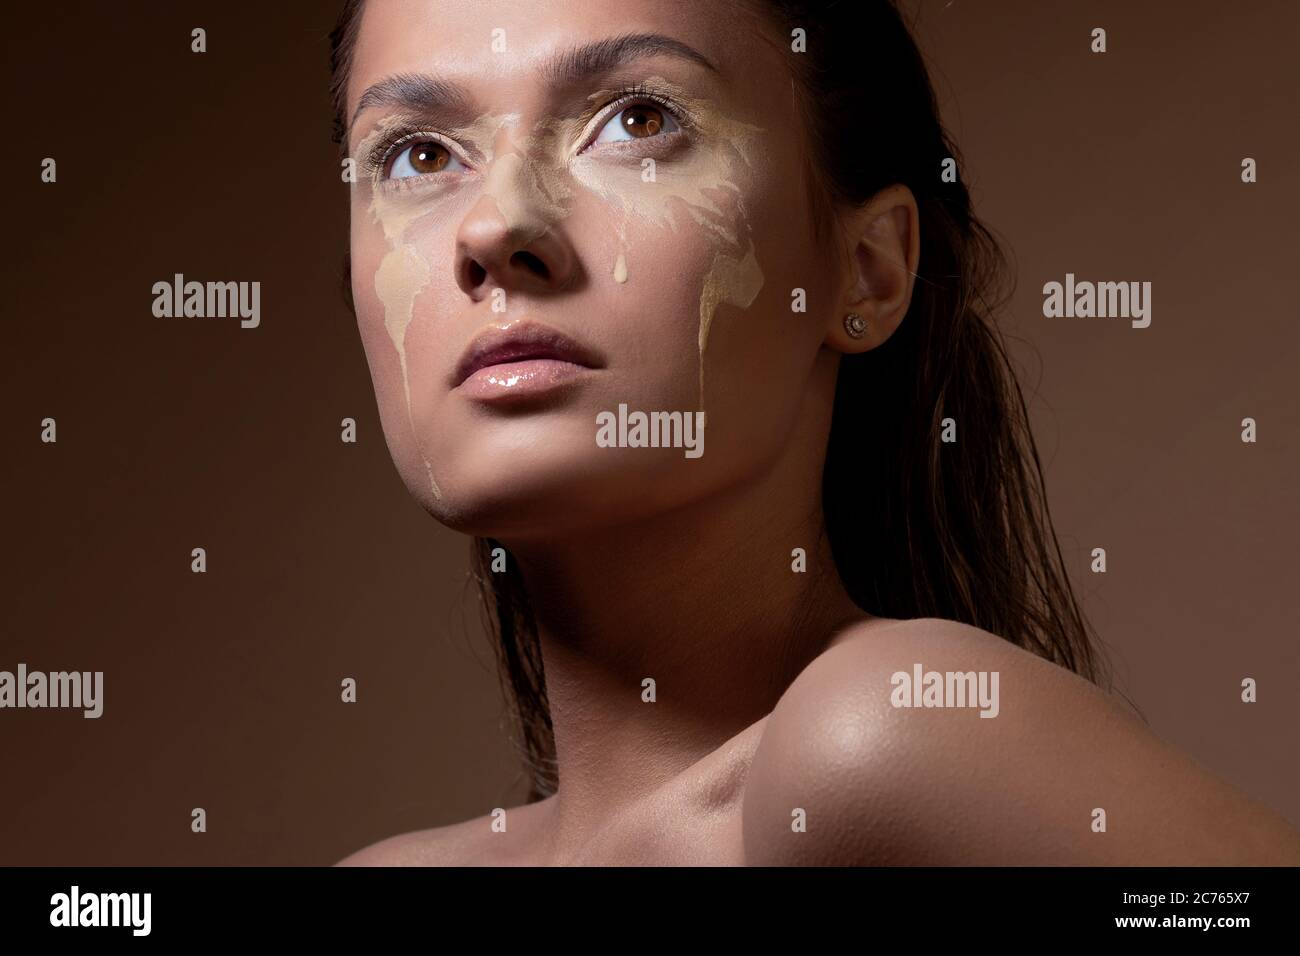 Concept portrait of a young beautiful girl with face art in the form of a map of the world. Light spots on tanned skin, the world with tears. Stock Photo